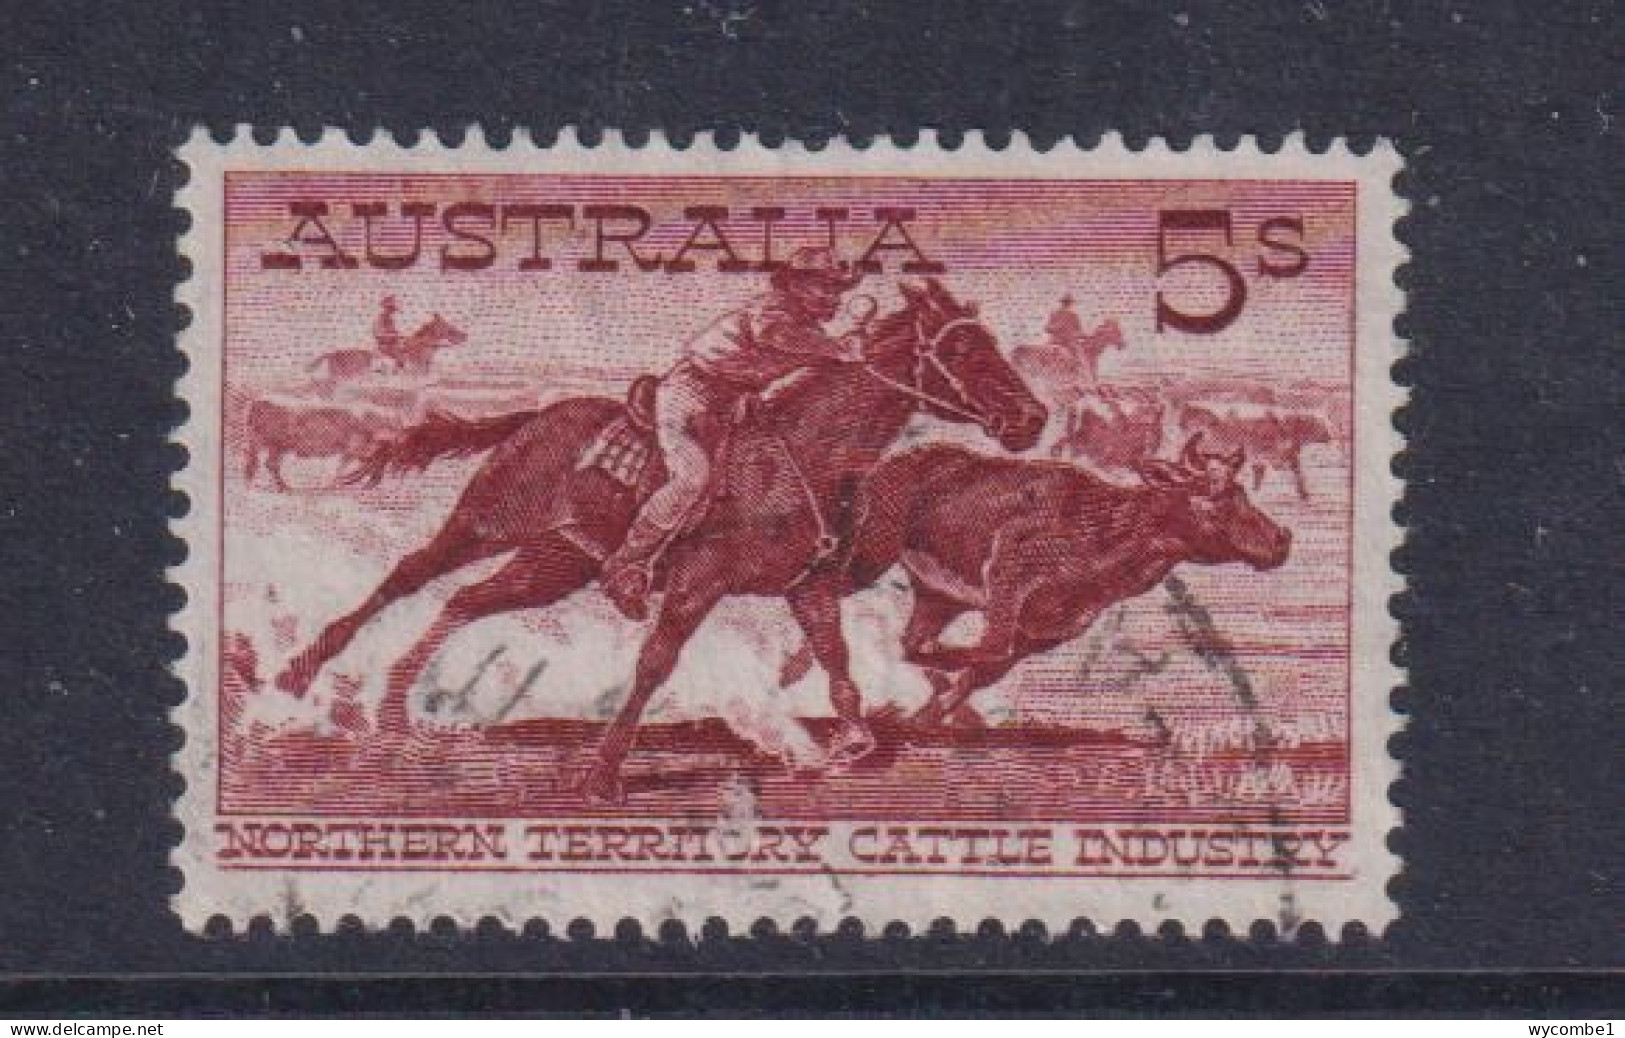 AUSTRALIA  - 1959-64 Pictorial Definitives 5s White Paper (SG327a) Used As Scan - Used Stamps